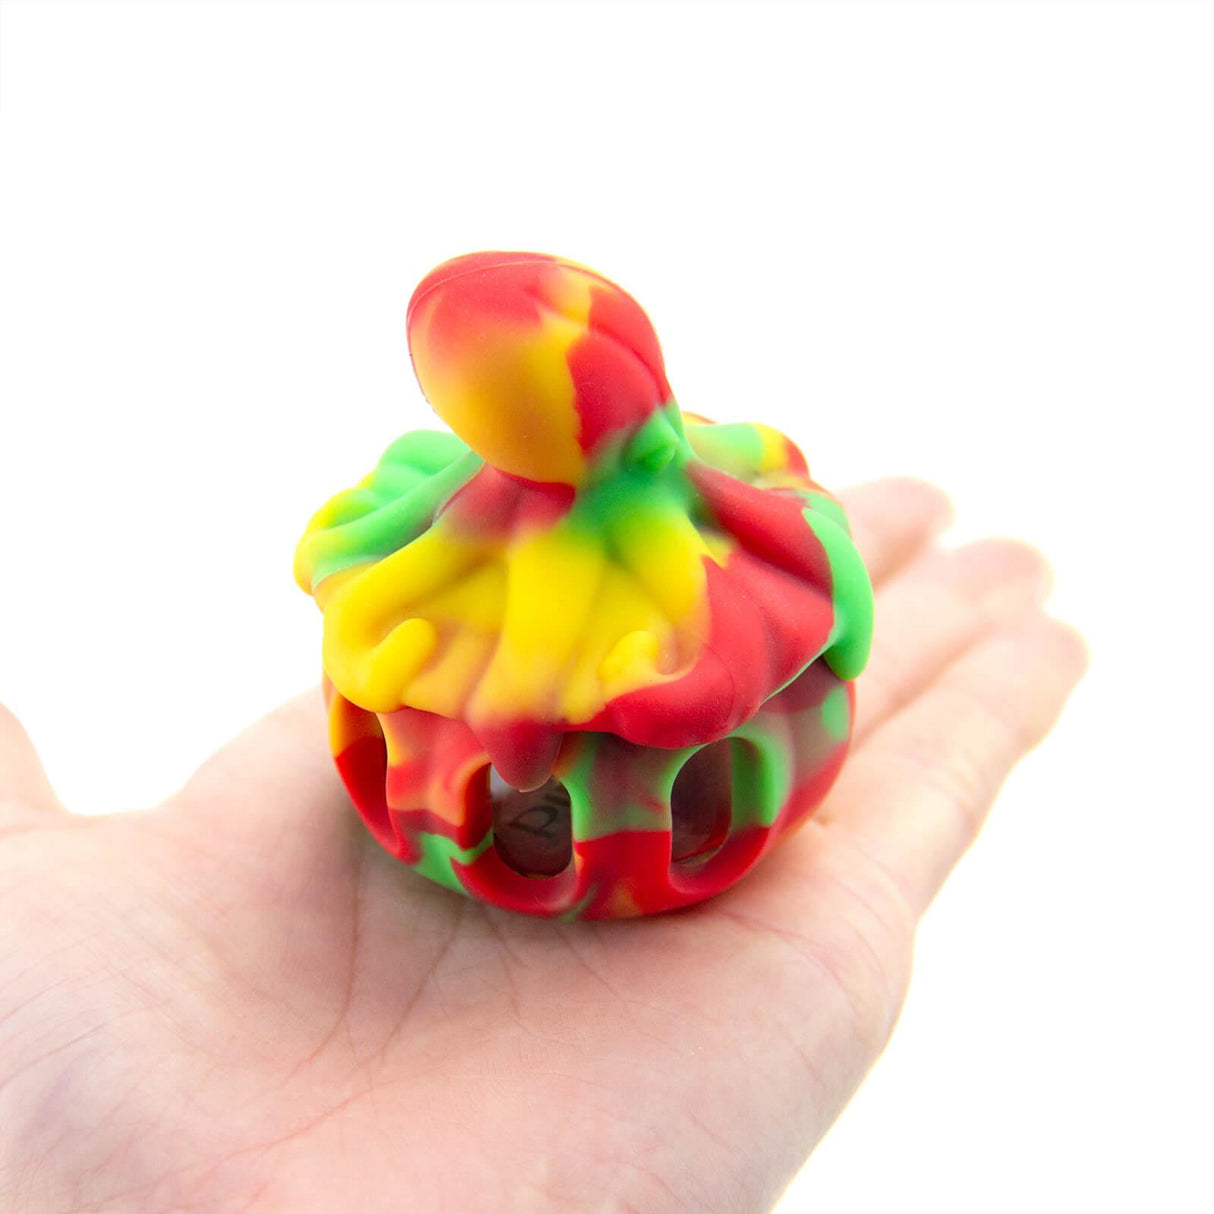 PILOT DIARY Octopus Silicone Dab Container 10ml in Hand, Colorful Design